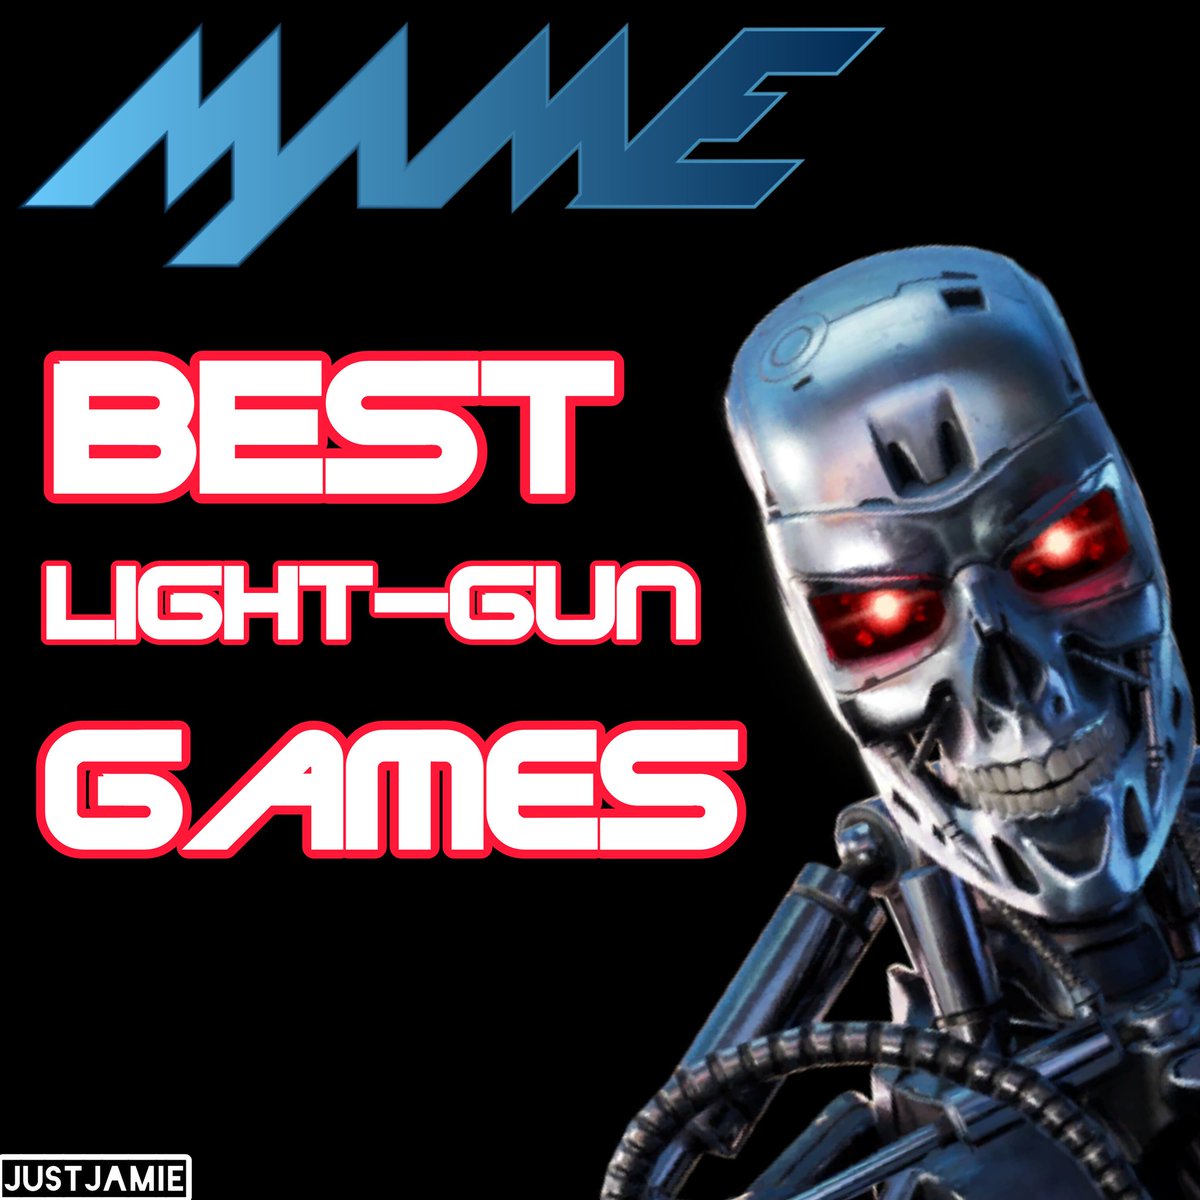 This is my top 10 personal favourite Light-Gun games for MAME. This is a good list including a few you might now have heard of before. youtu.be/Oxh3yv3_Bug #mame #arcadegames #arcadegaming #RETROGAMING #justjamie